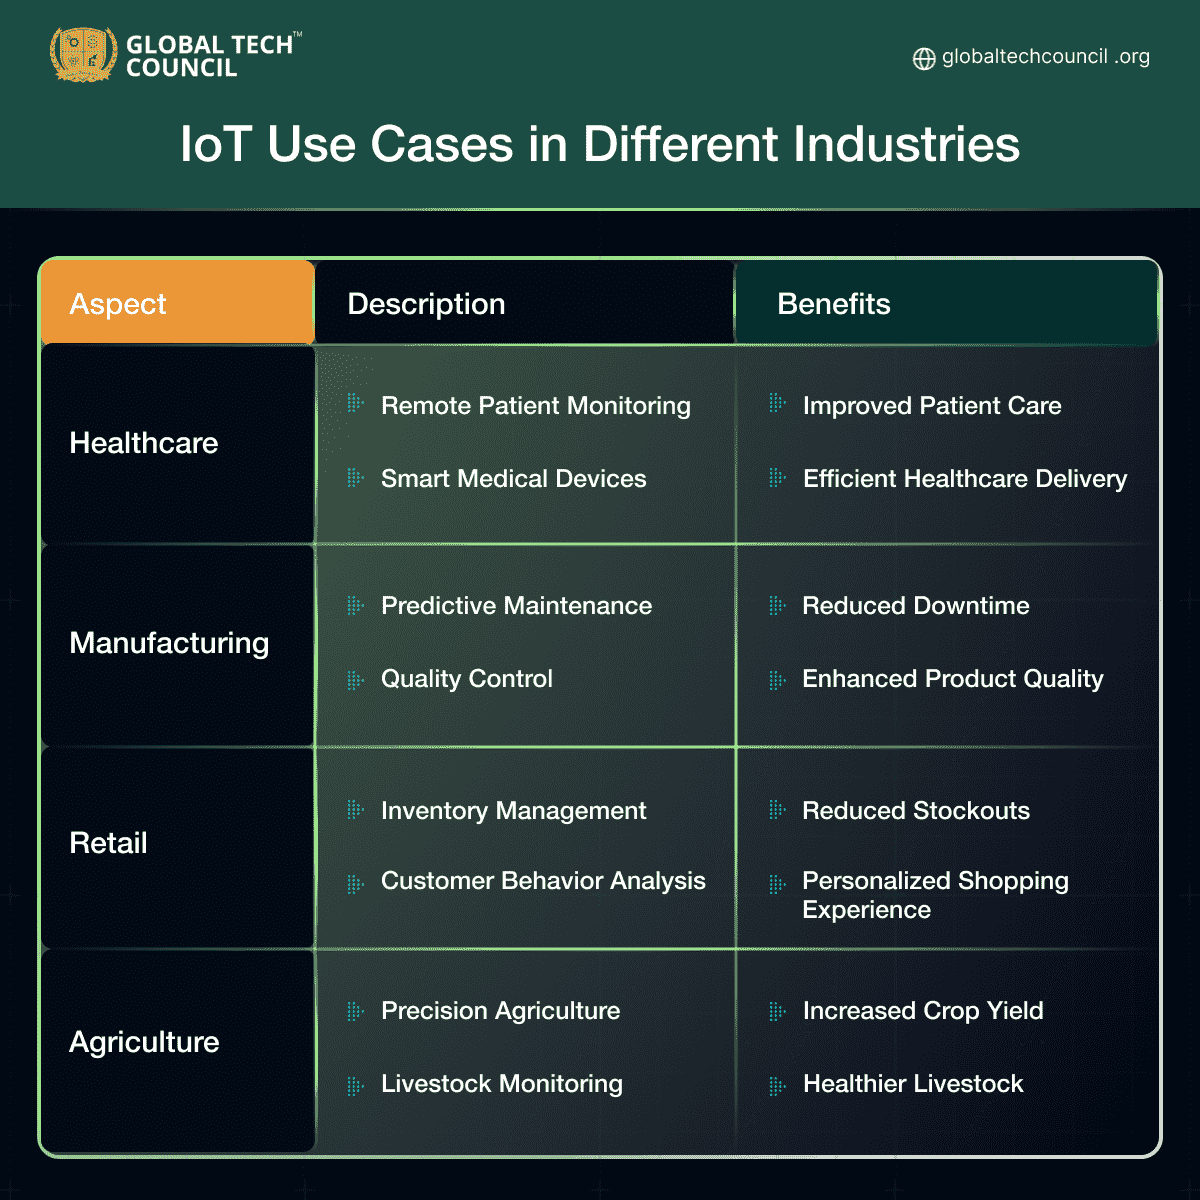 IoT Use Cases in Different Industries